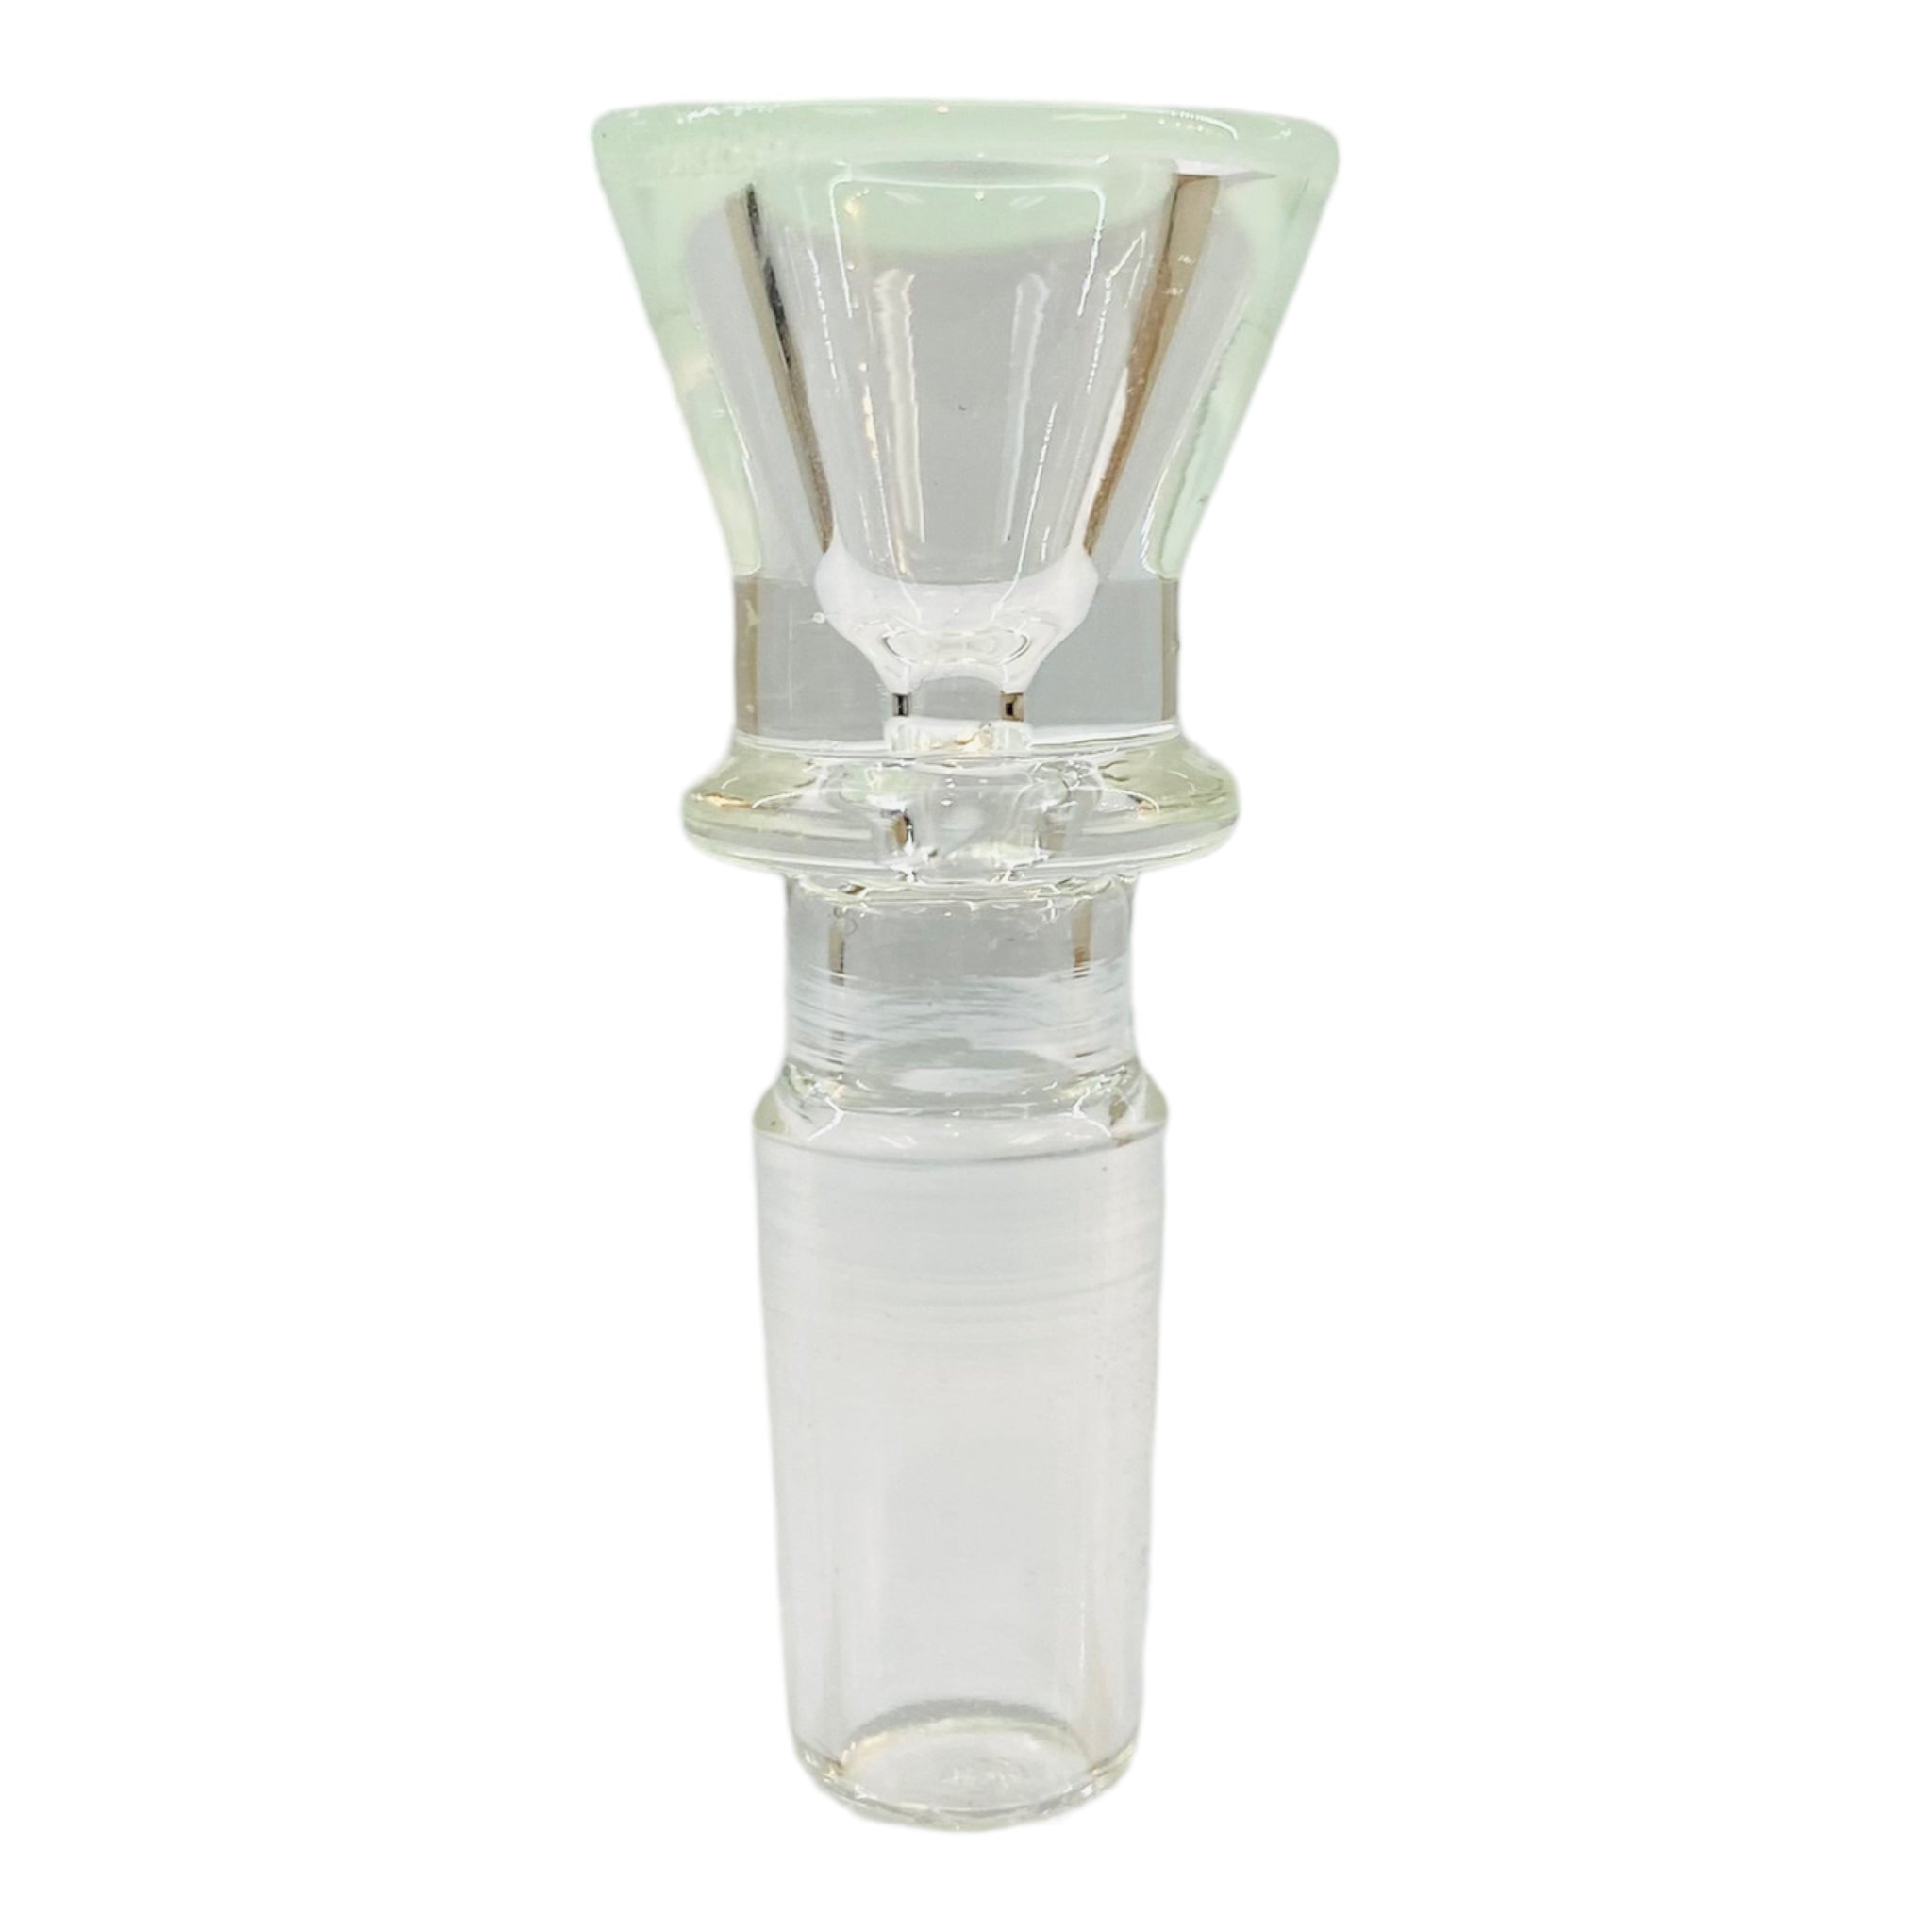 14mm Flower Bowl - Clear Martini Funnel Bong Bowl Piece With Color Lip - Sea Foam Green